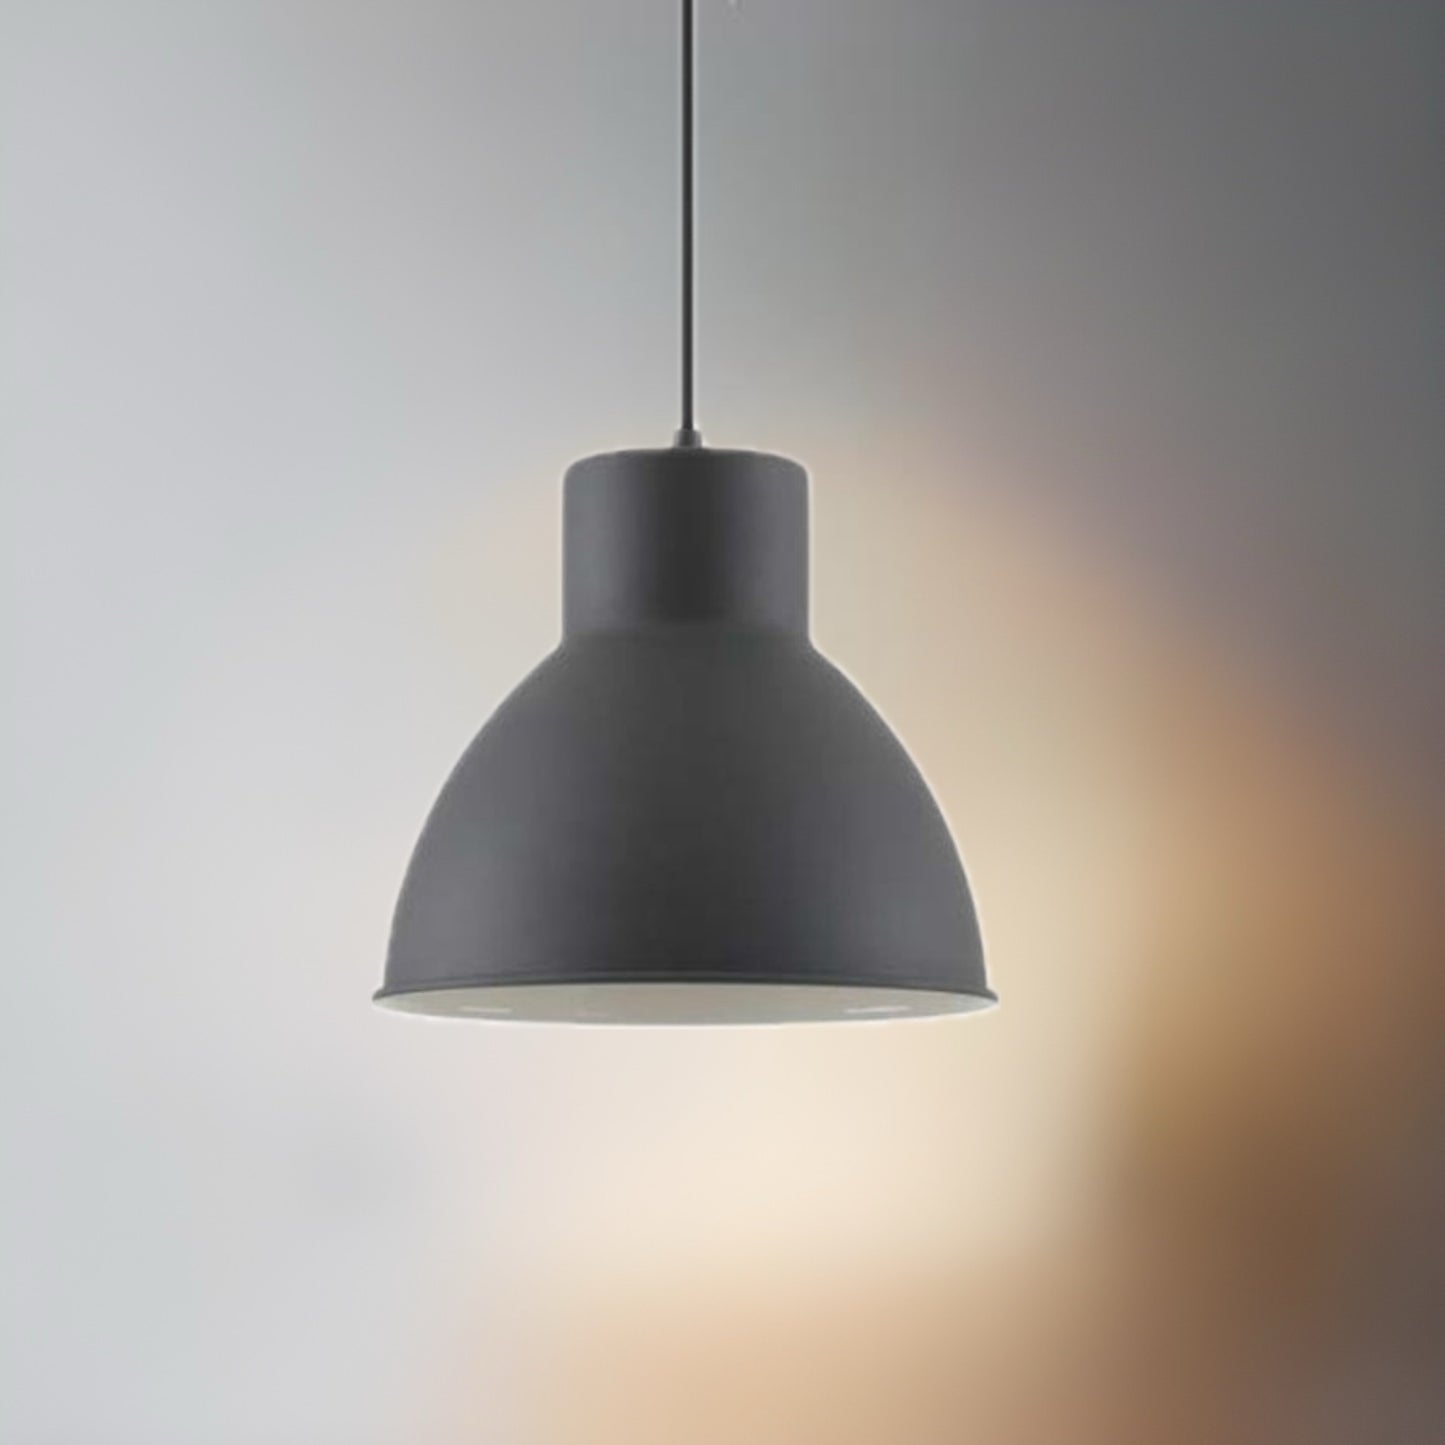 Our popular Dante ceiling light, comes in a signature dome shape with a matt black finish. It is height-adjustable at the point of installation so you can position it to your exact requirements. One E27 bulb is required as it enhances such a warm and inviting glow from the contrasting inner, would look great above kitchen islands, dining tables or as main light fitting in any room.